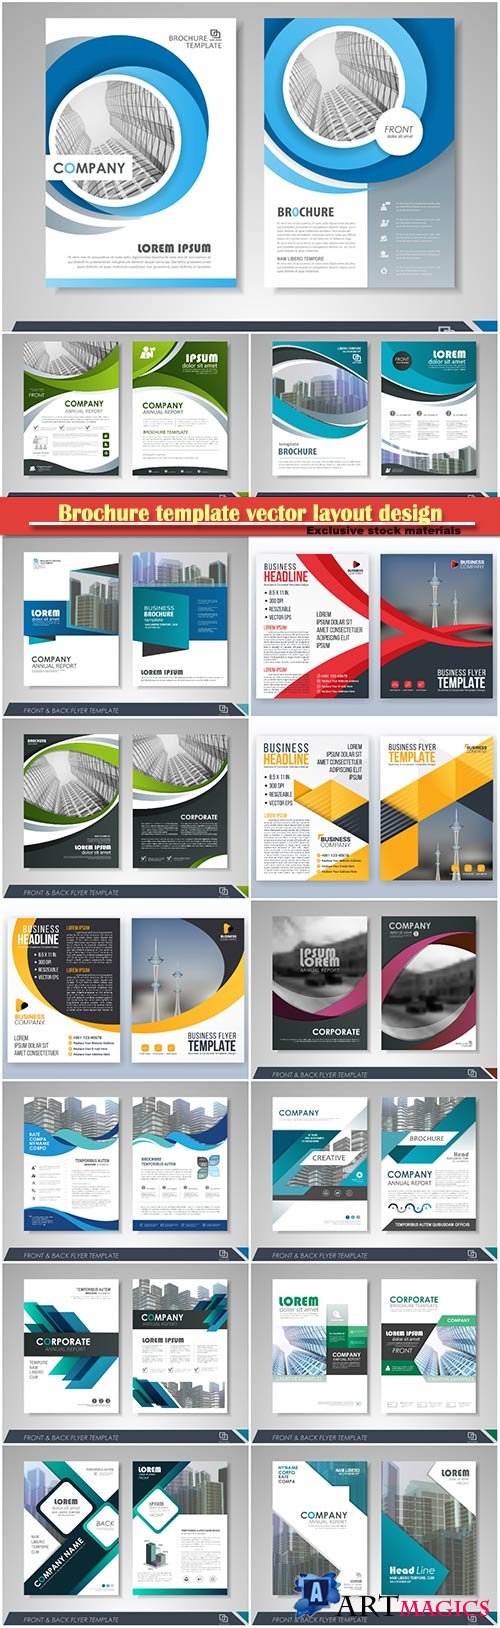 Brochure template vector layout design, corporate business annual report, magazine, flyer mockup # 210